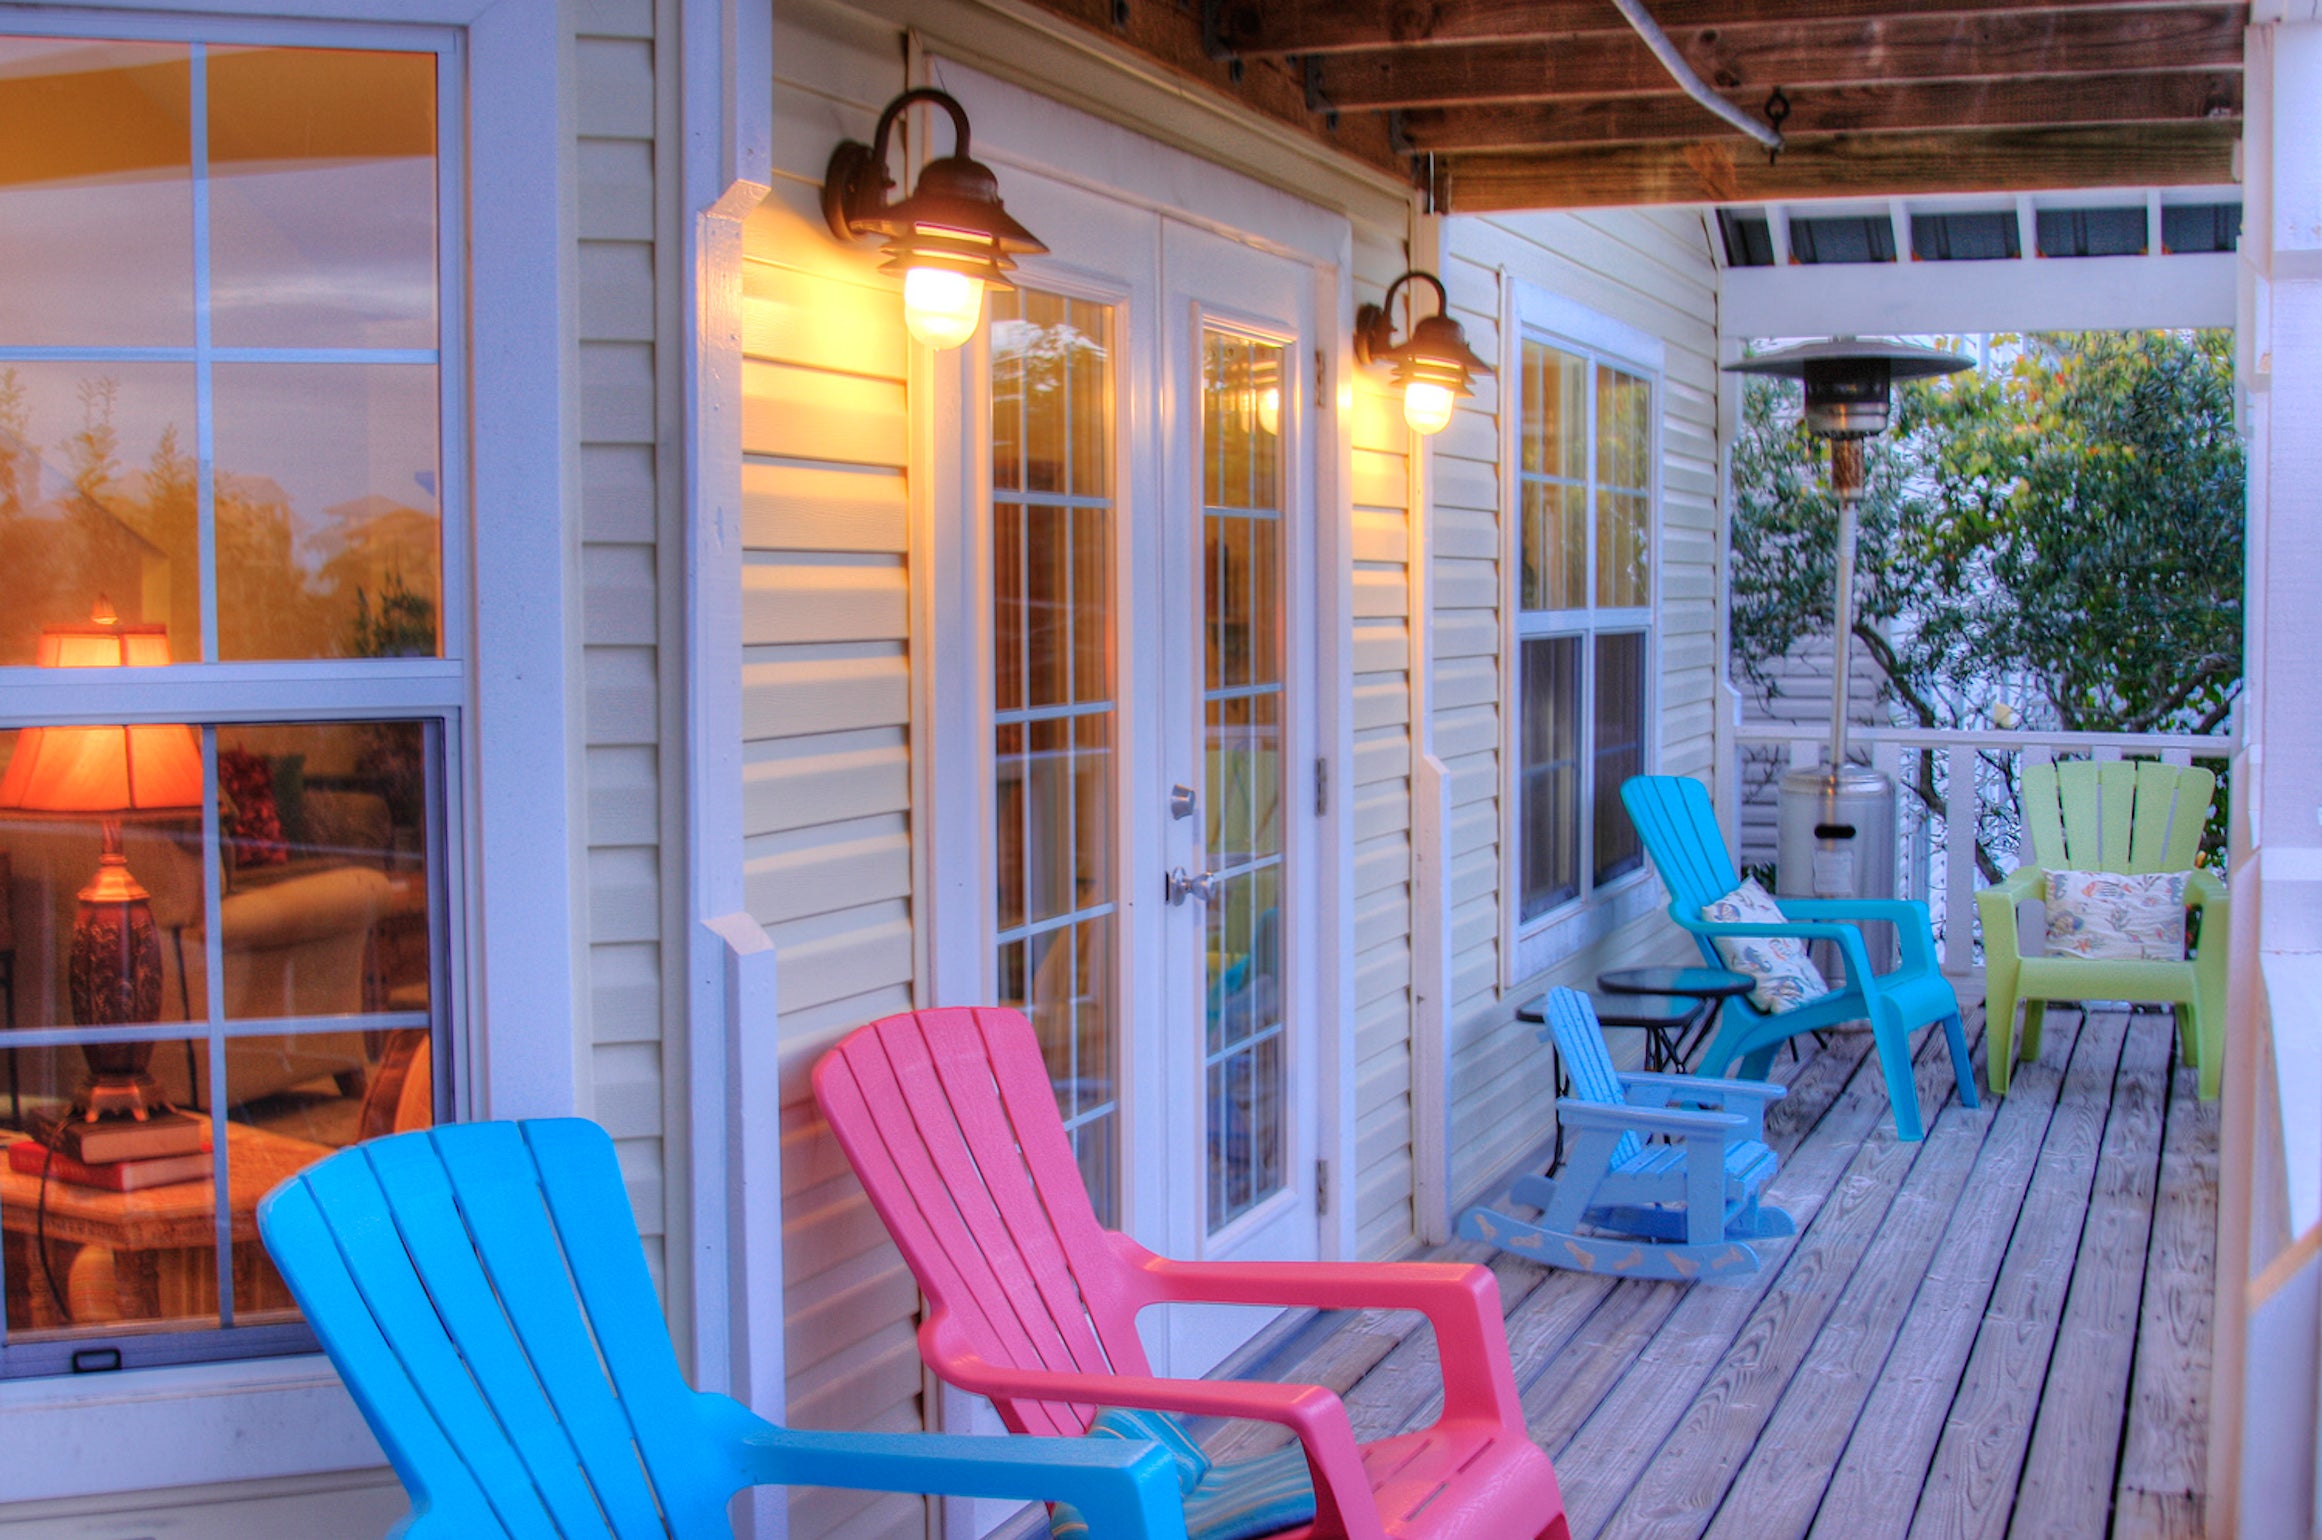 Imagine yourself on this side porch